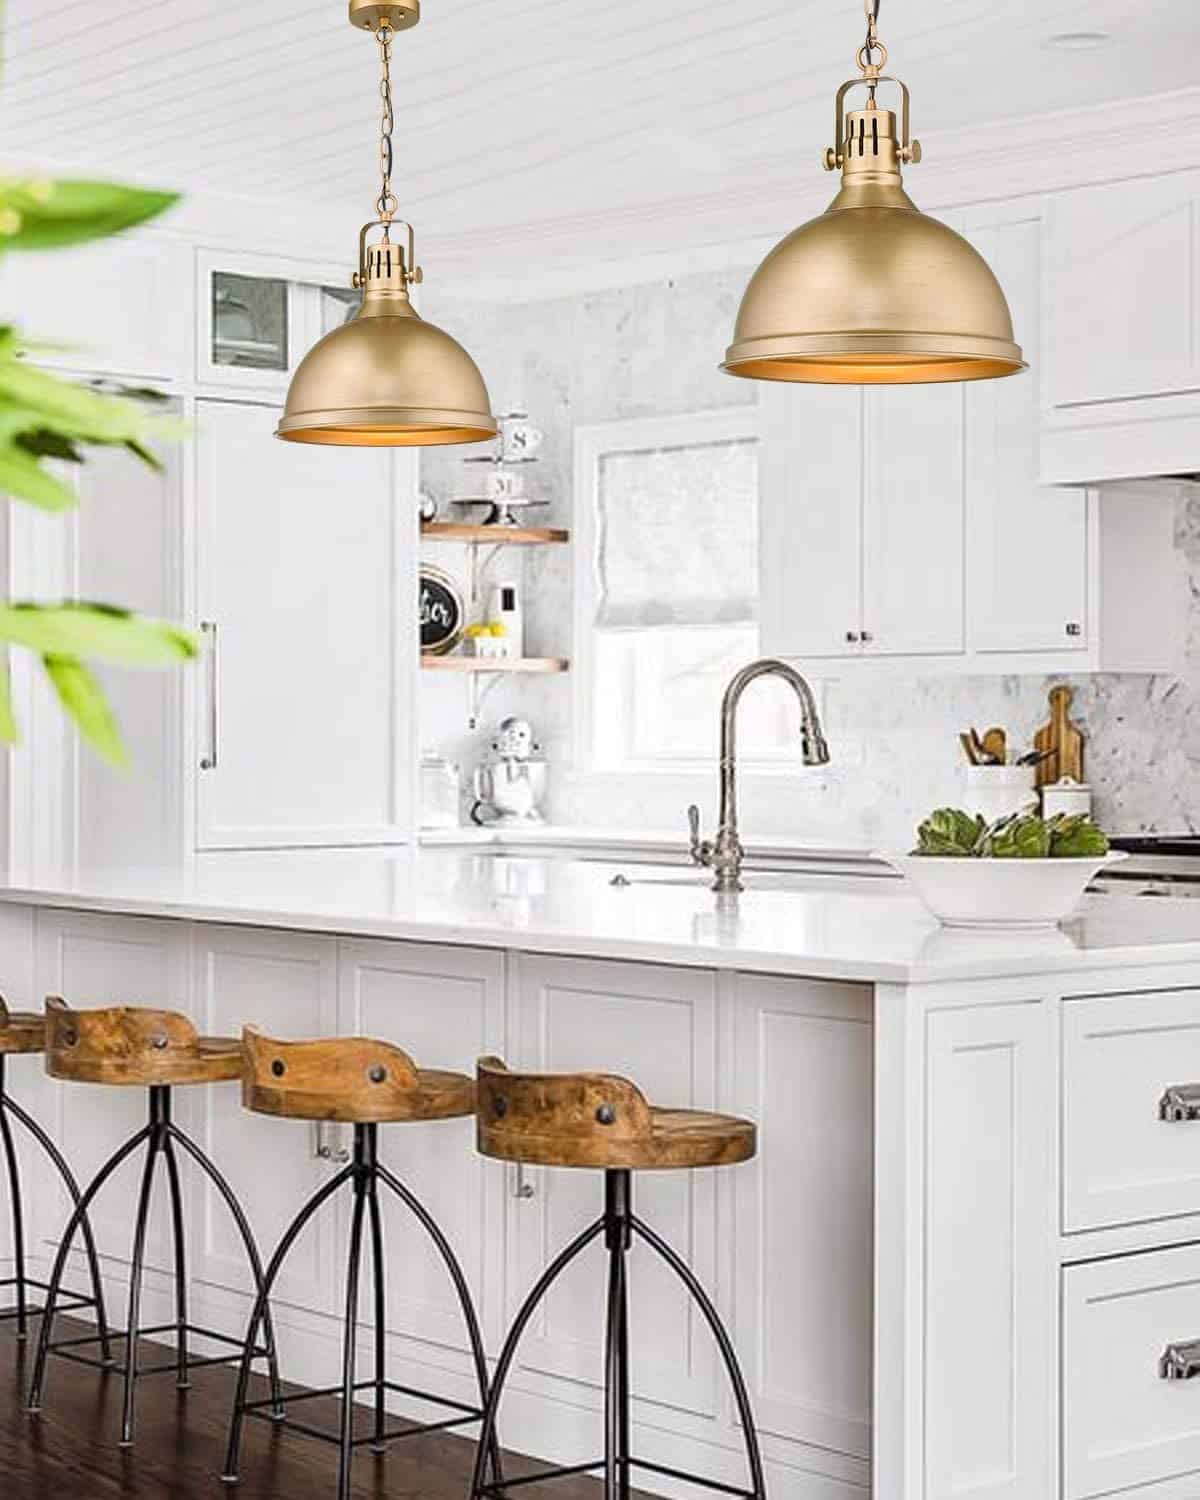 Two large brass bell style pendant lights over white island in modern farmhouse style kitchen.